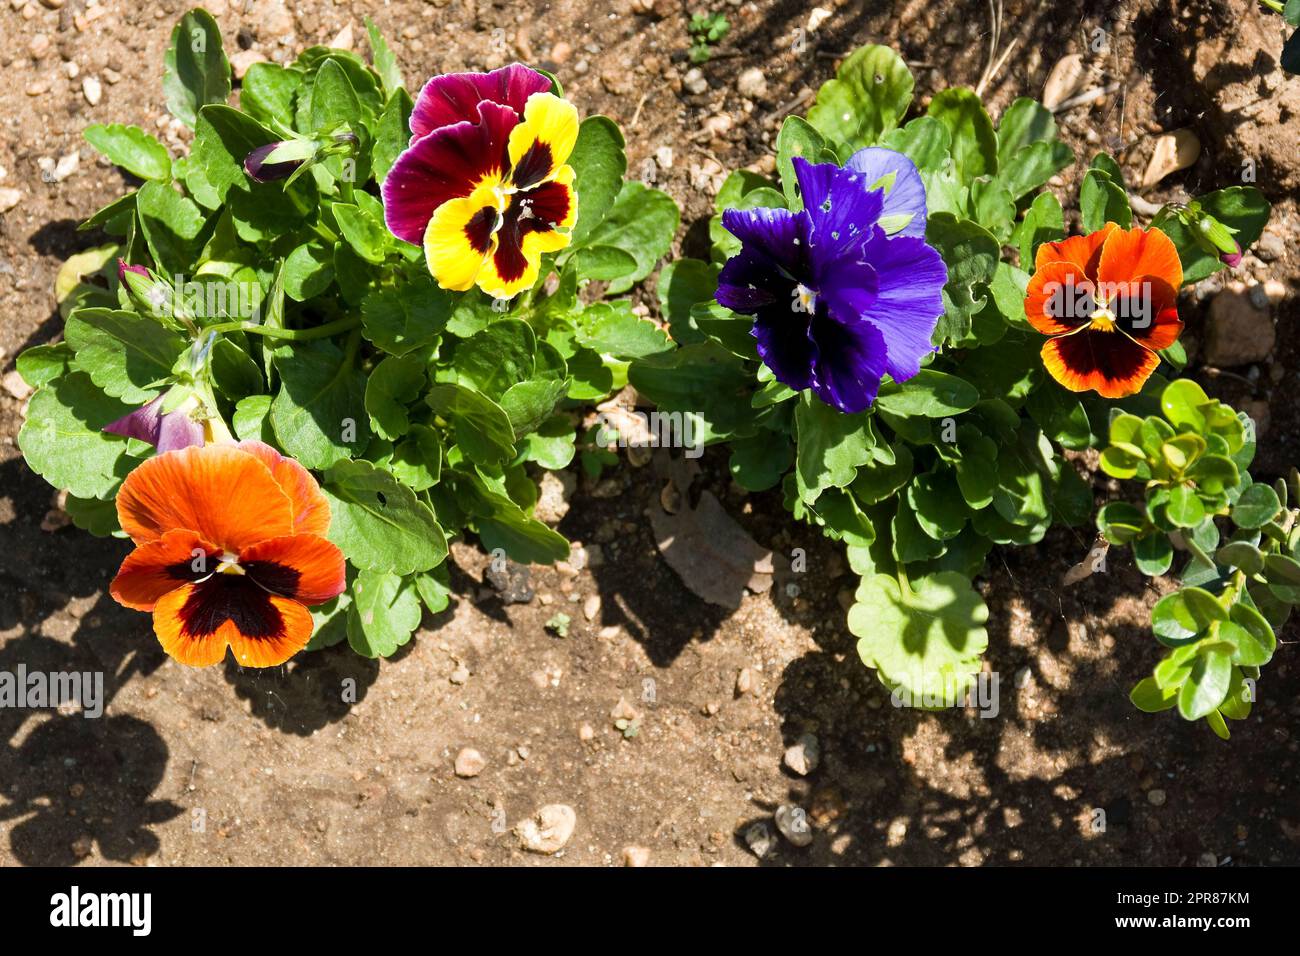 Bright, colorful and beautiful pansies with orange, yellow, purple and blue petals bloomed in the Spring Stock Photo